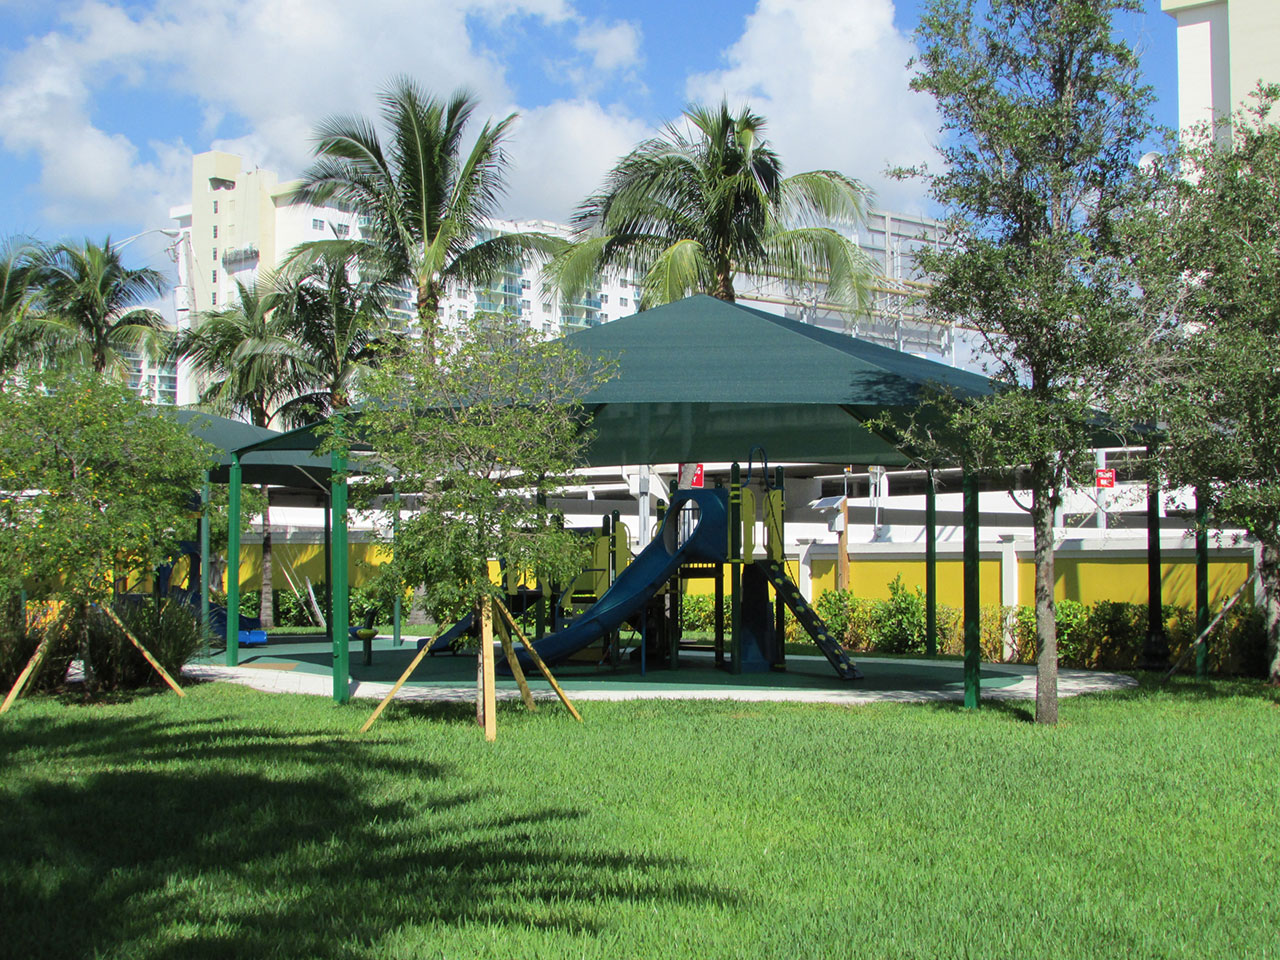 green shade covering playground surrounded by trees